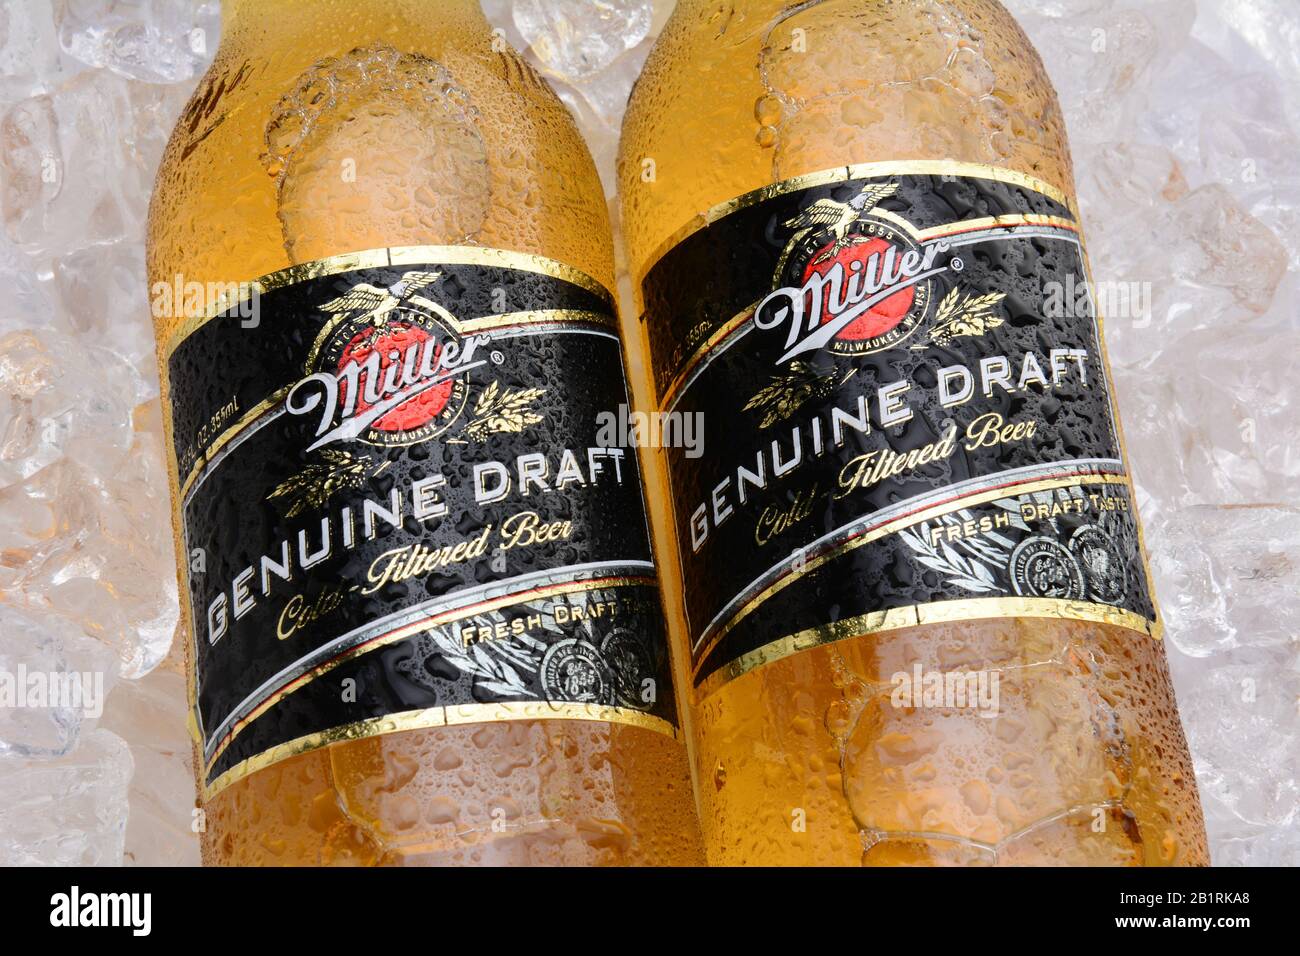 IRVINE, CA - MAY 27, 2014: Two Bottles of Miller Genuine Draft, on ice. MGD is actually made from the same recipe as Miller High Life except it is col Stock Photo